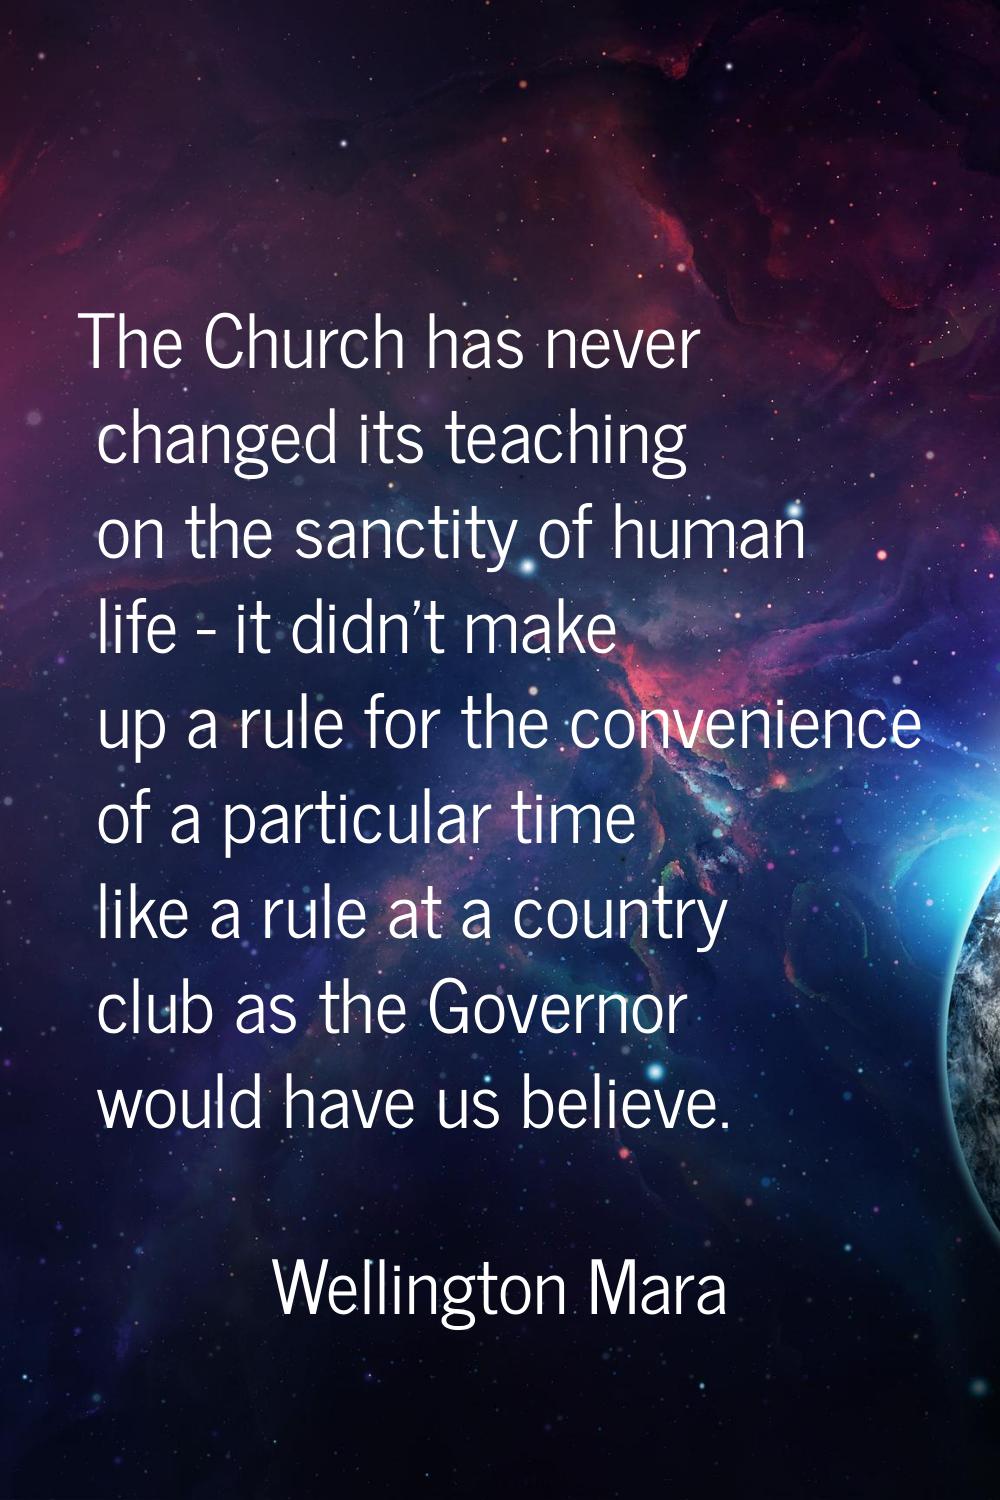 The Church has never changed its teaching on the sanctity of human life - it didn't make up a rule 